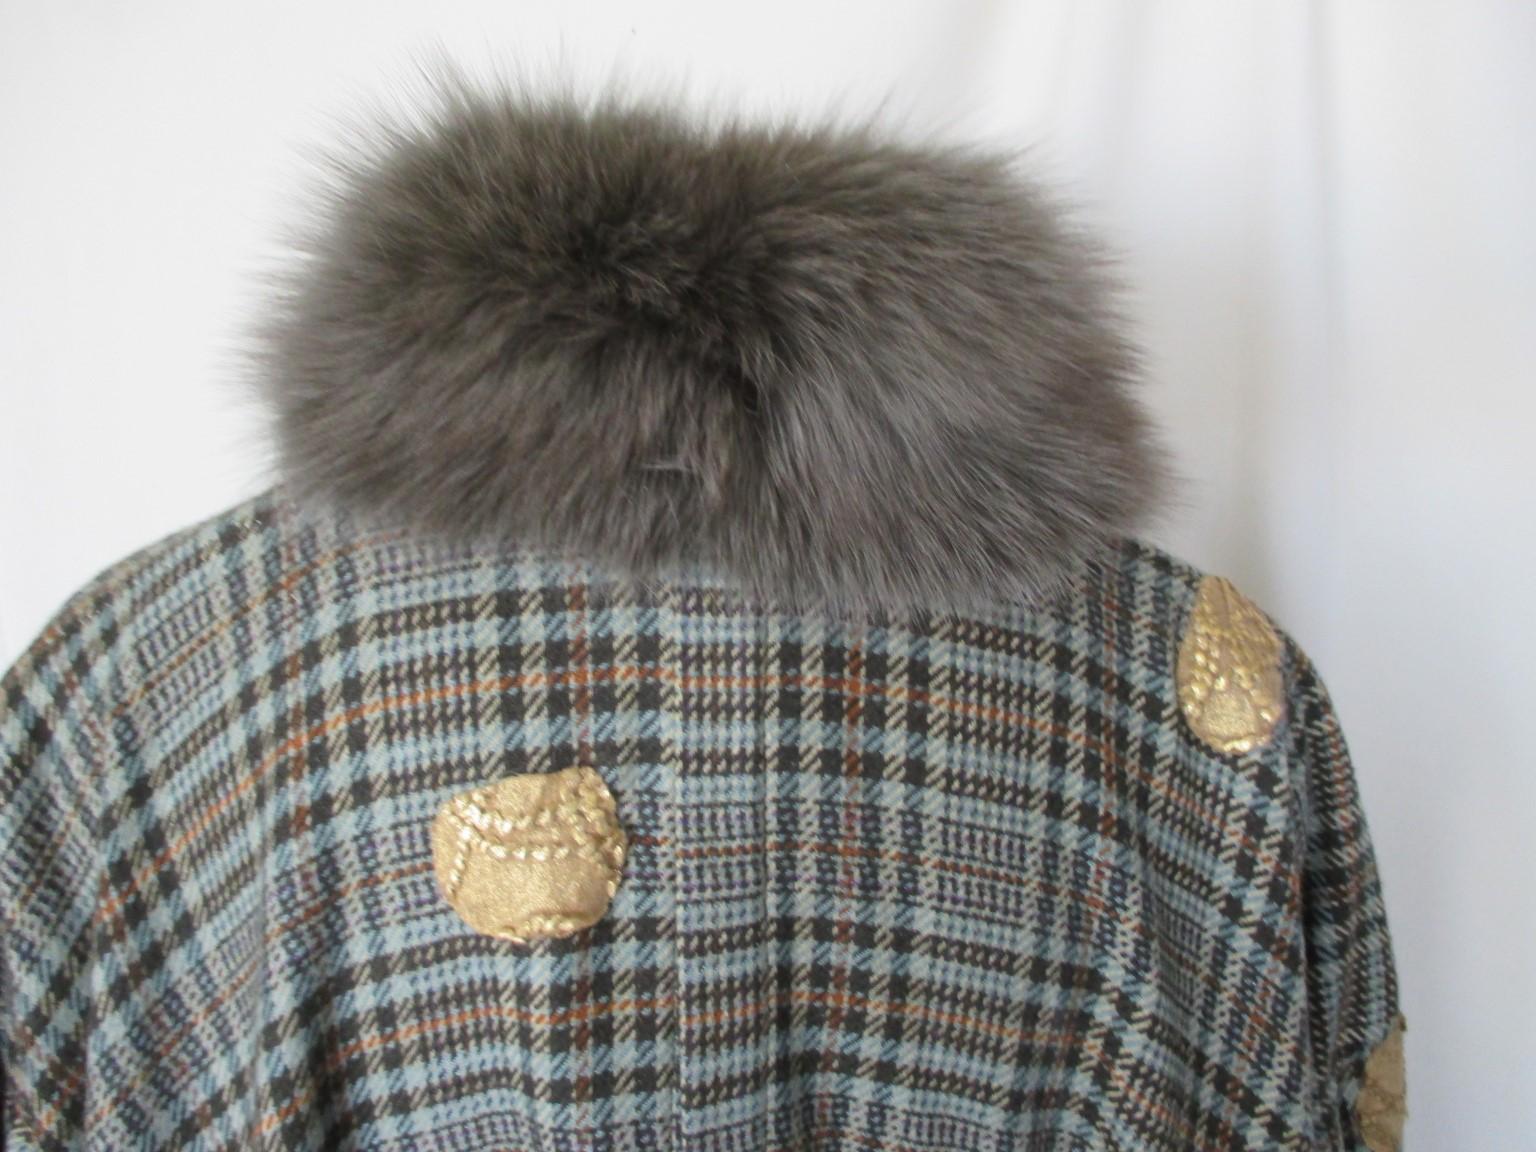  Hippy Chic Checked Wool Fox Fur Stole Cape In Fair Condition For Sale In Amsterdam, NL